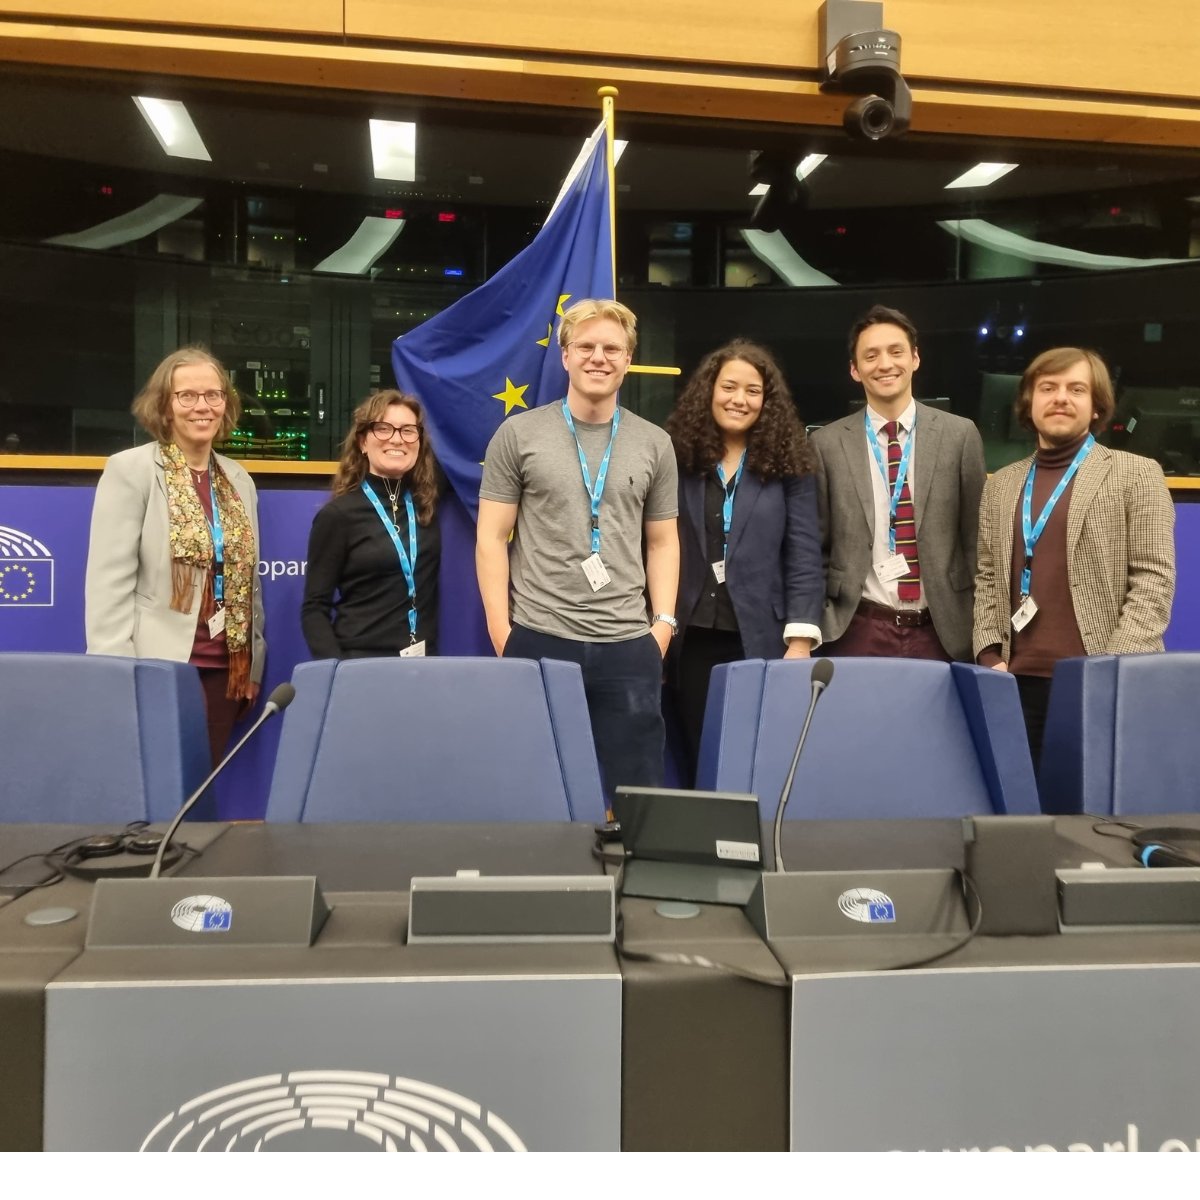 💫CHARM-EU at the #ESA24!🎓Our students Victor, Maryam, Clothilde, Take, and Lu-Yen have represented #CHARMEU at the @Europarl_EN  Young EU citizens have discussed about:  🌱Greener is better 🚀Seeaking a better future 💻EU Artificial Intelligence Act 🤝Addressing Euroscepticism